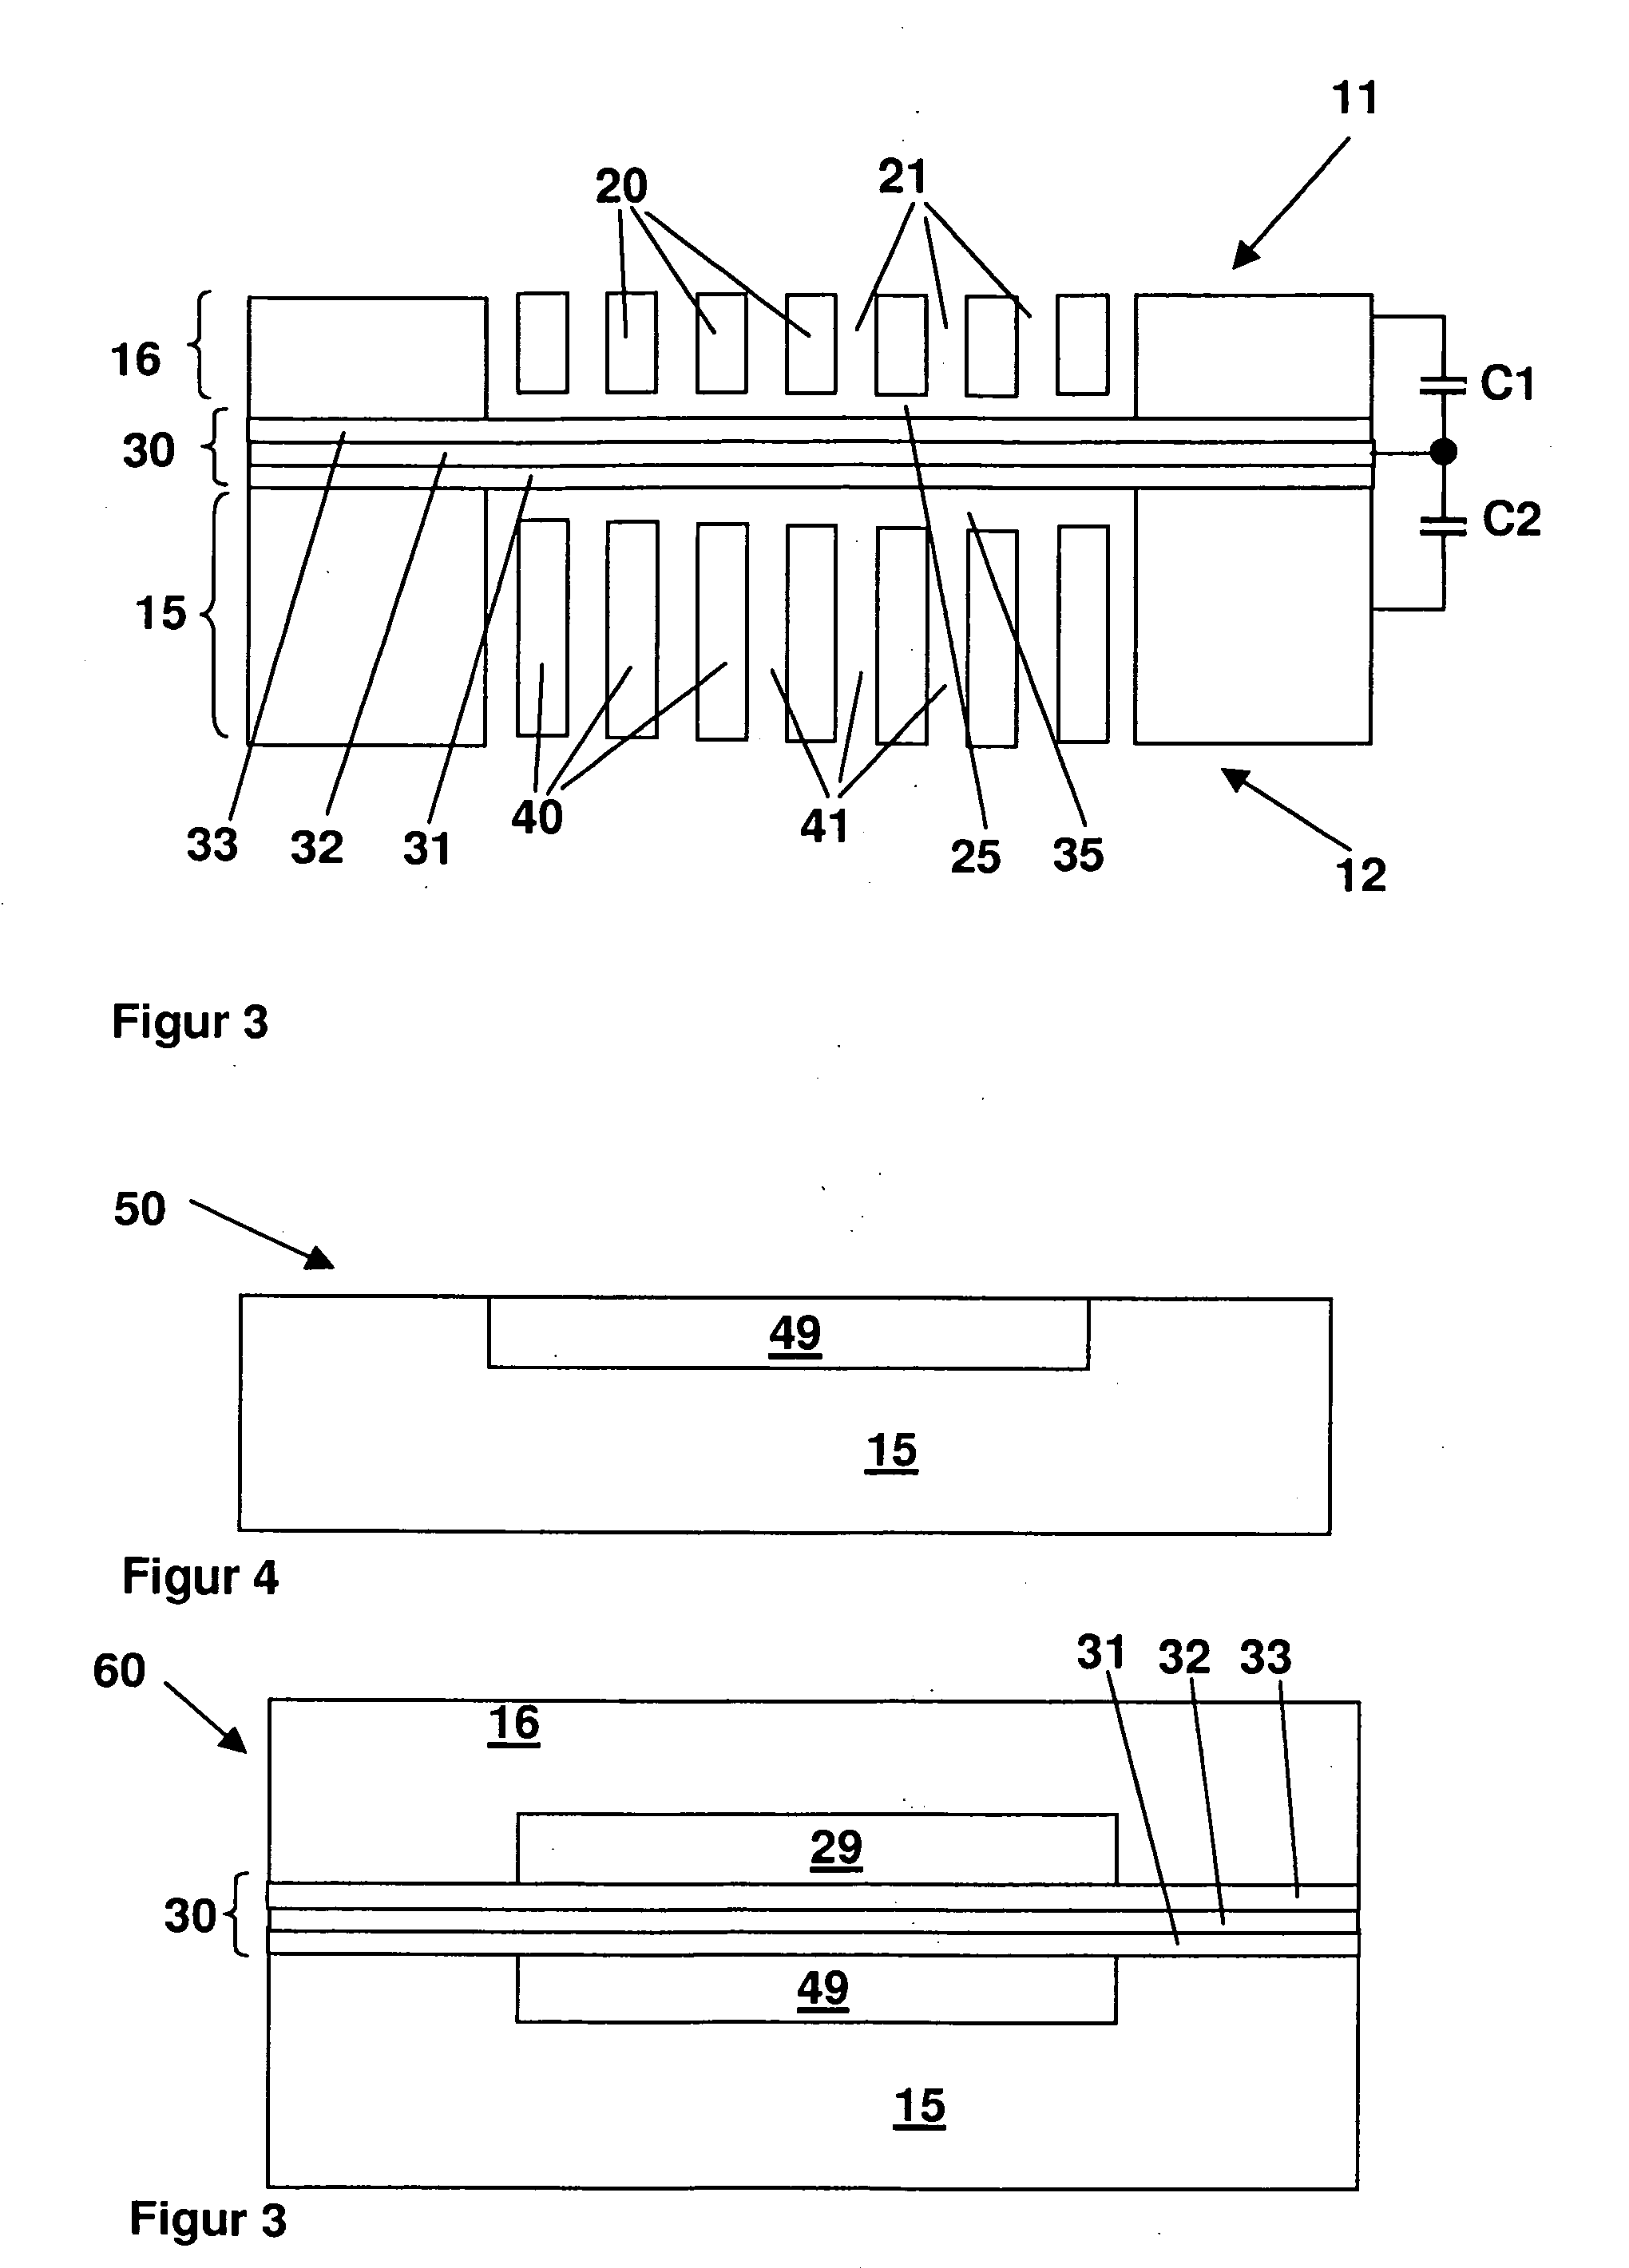 Micromechanical Structure for Receiving and/or Generating Acoustic Signals, Method for Producing a Micromechnical Structure, and Use of a Micromechanical Structure